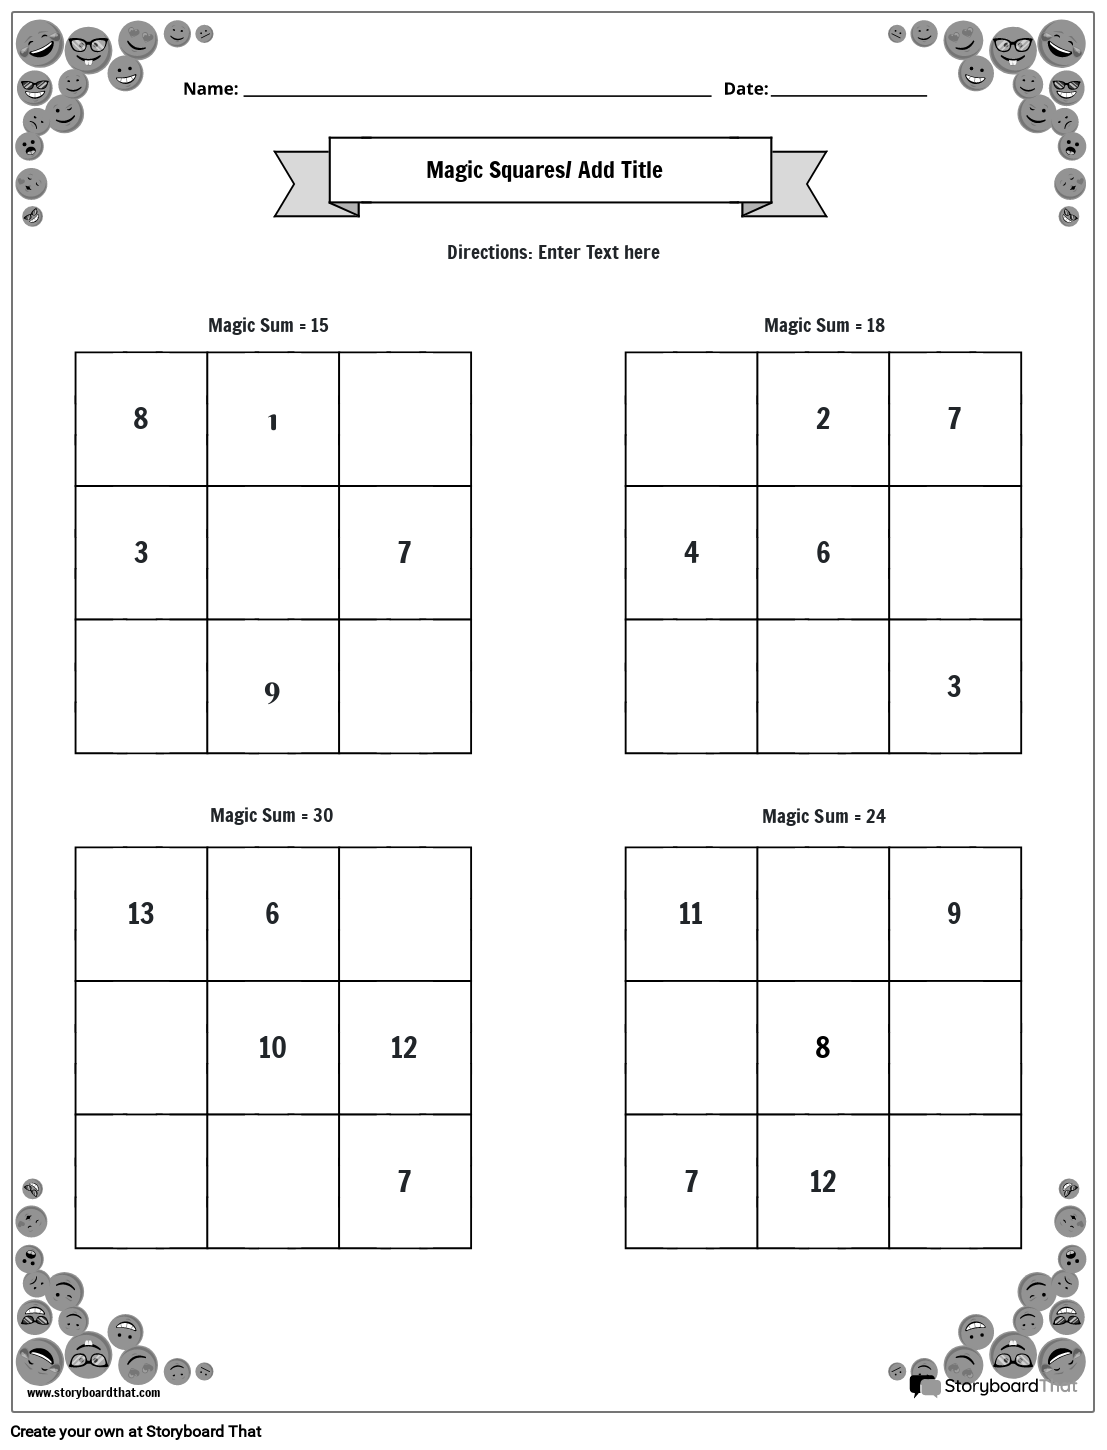 3x3 Magic Squares Worksheet with Smiley Face Border (black and white)